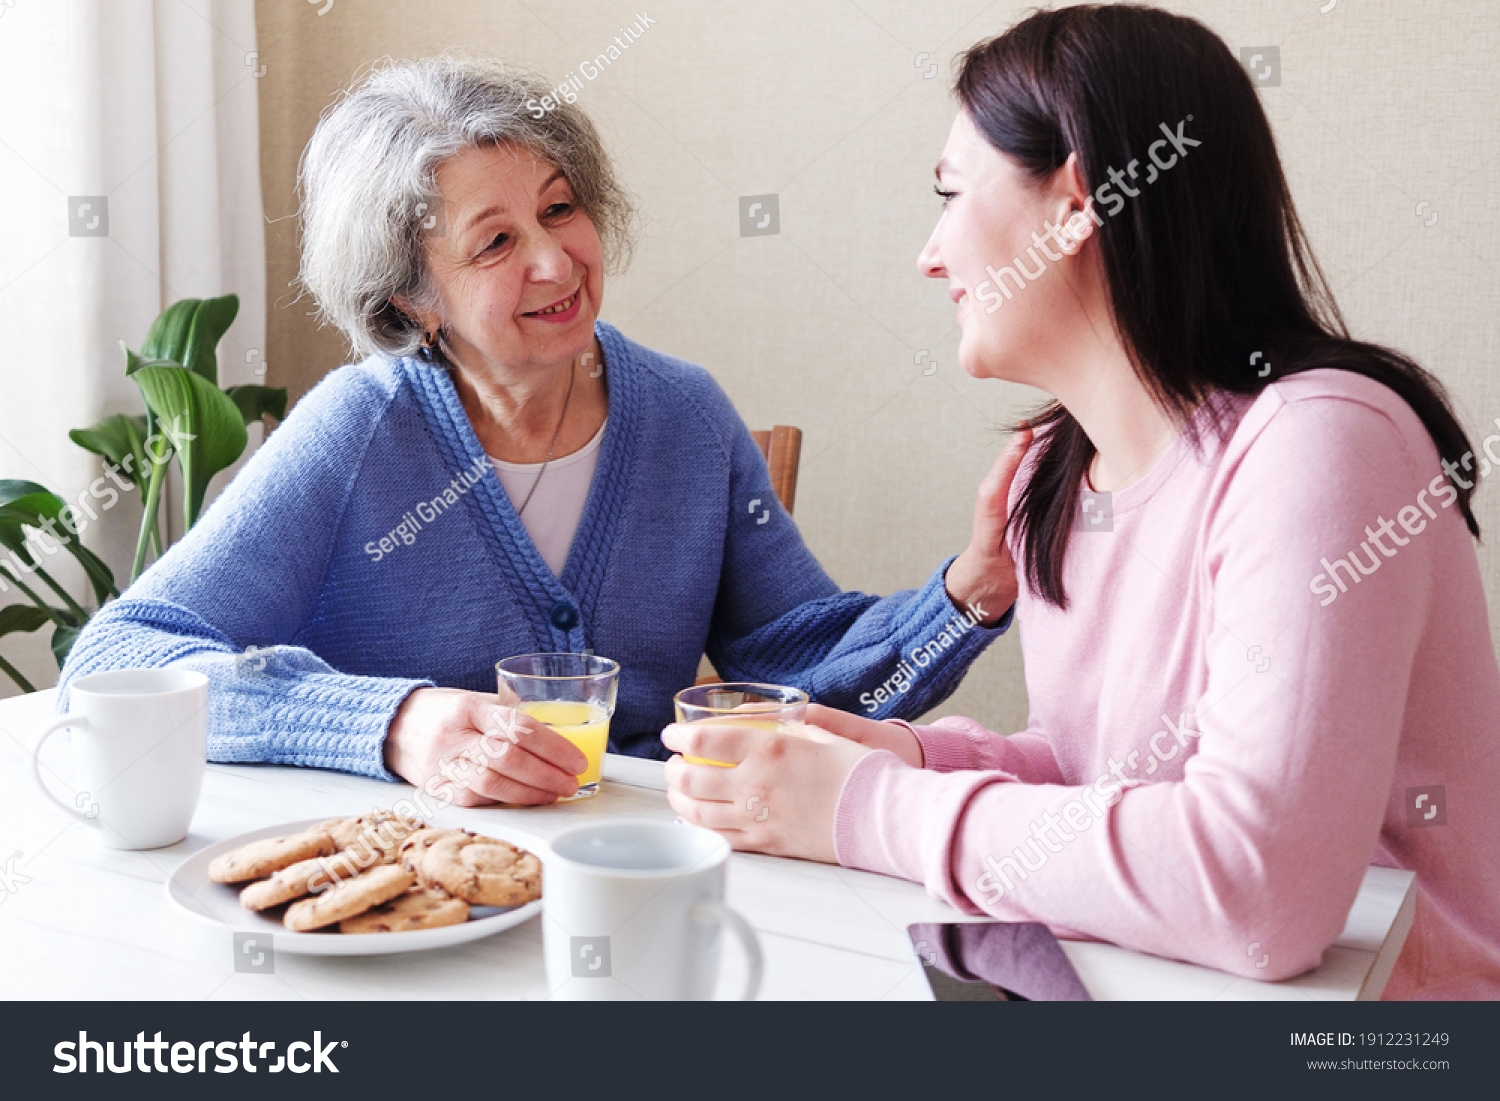 Daughter Visits Elderly Mother They Talk Stock Photo (Edit Now) 1912231249